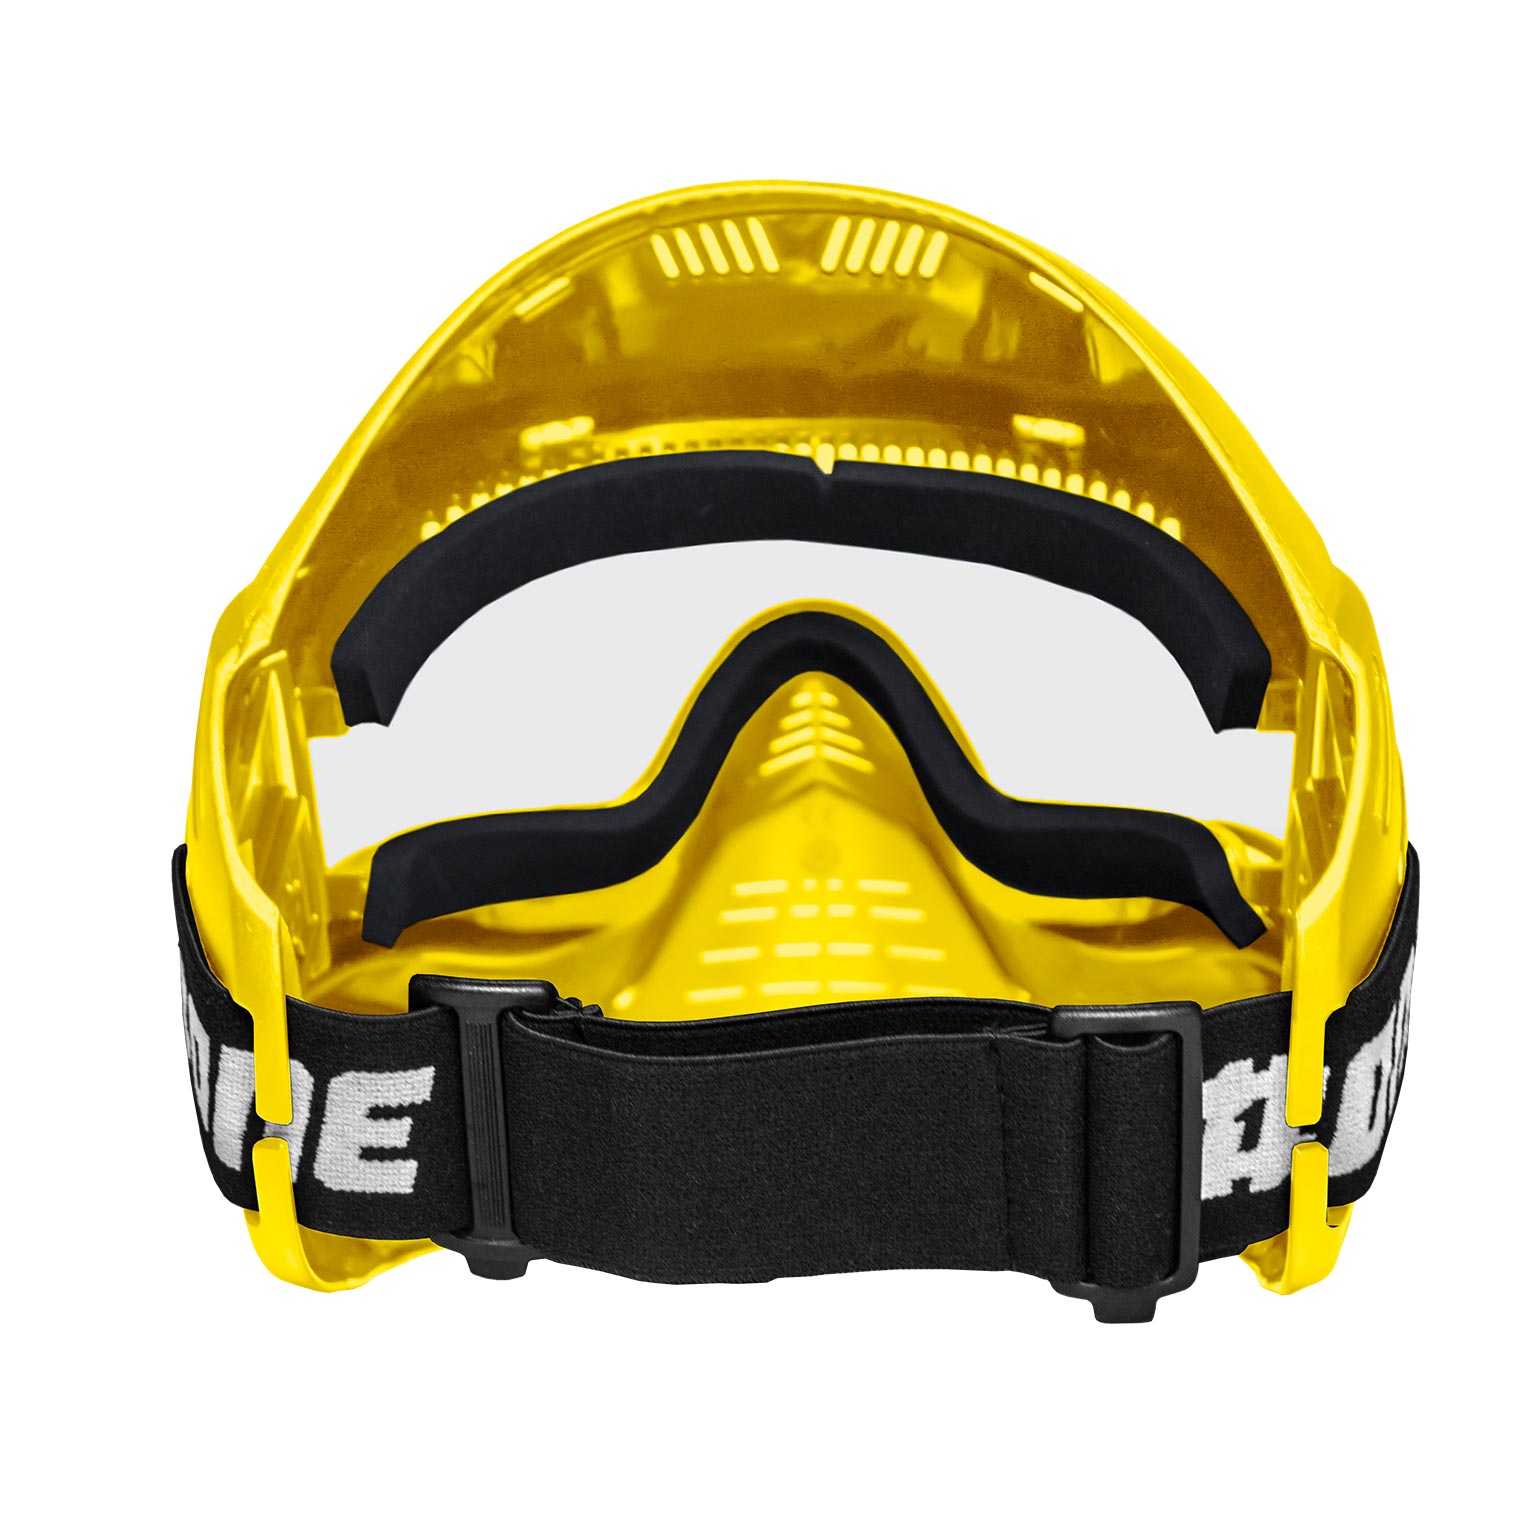 FIELDpb ONE Goggle Referee (Thermal Lens)